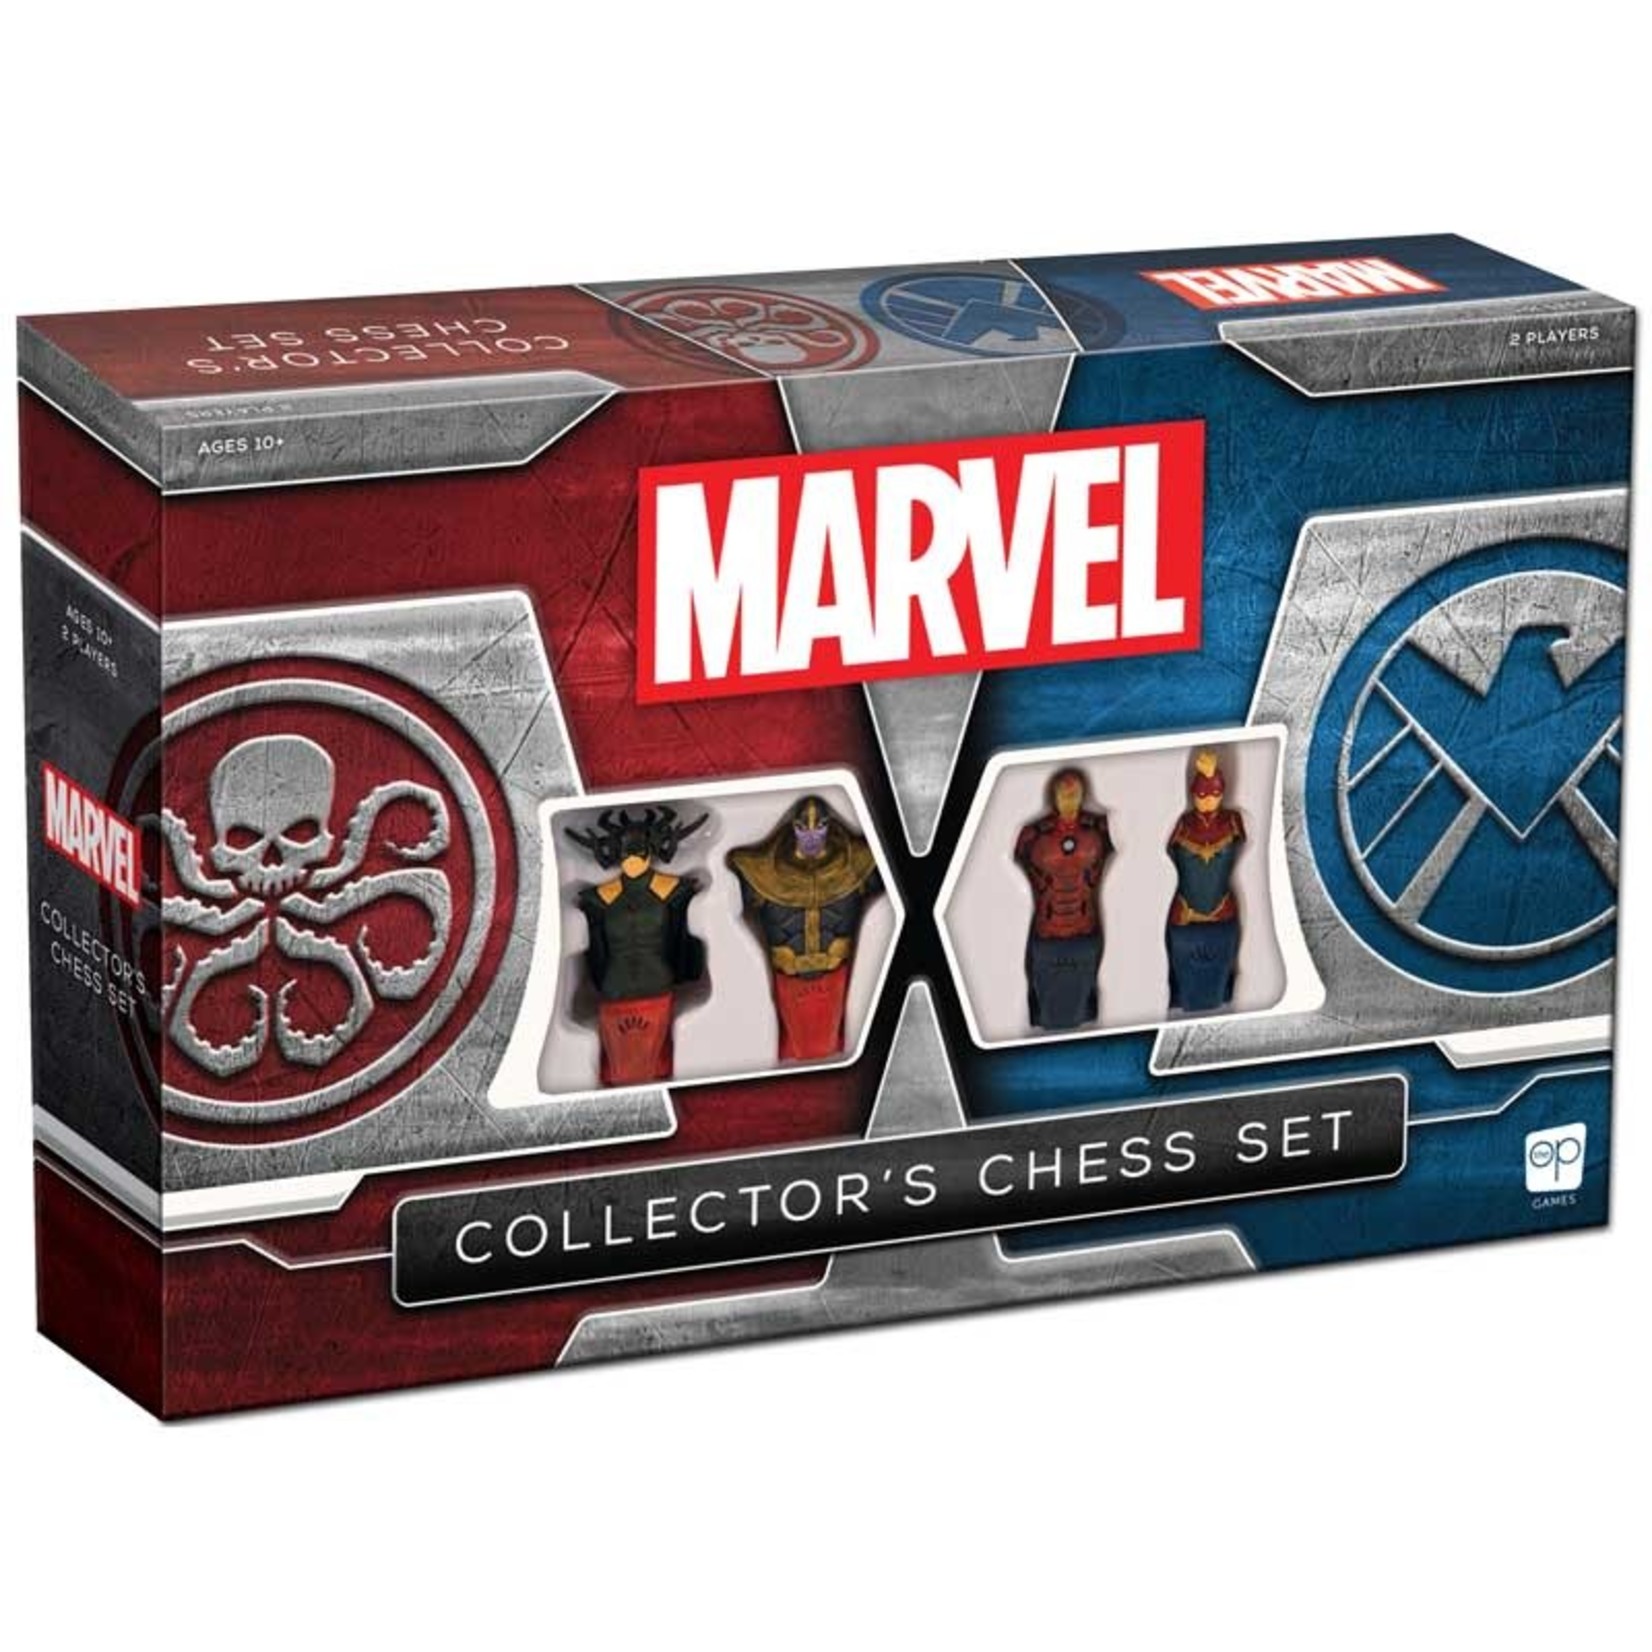 Chess Set: Marvel Collector's Chess Set